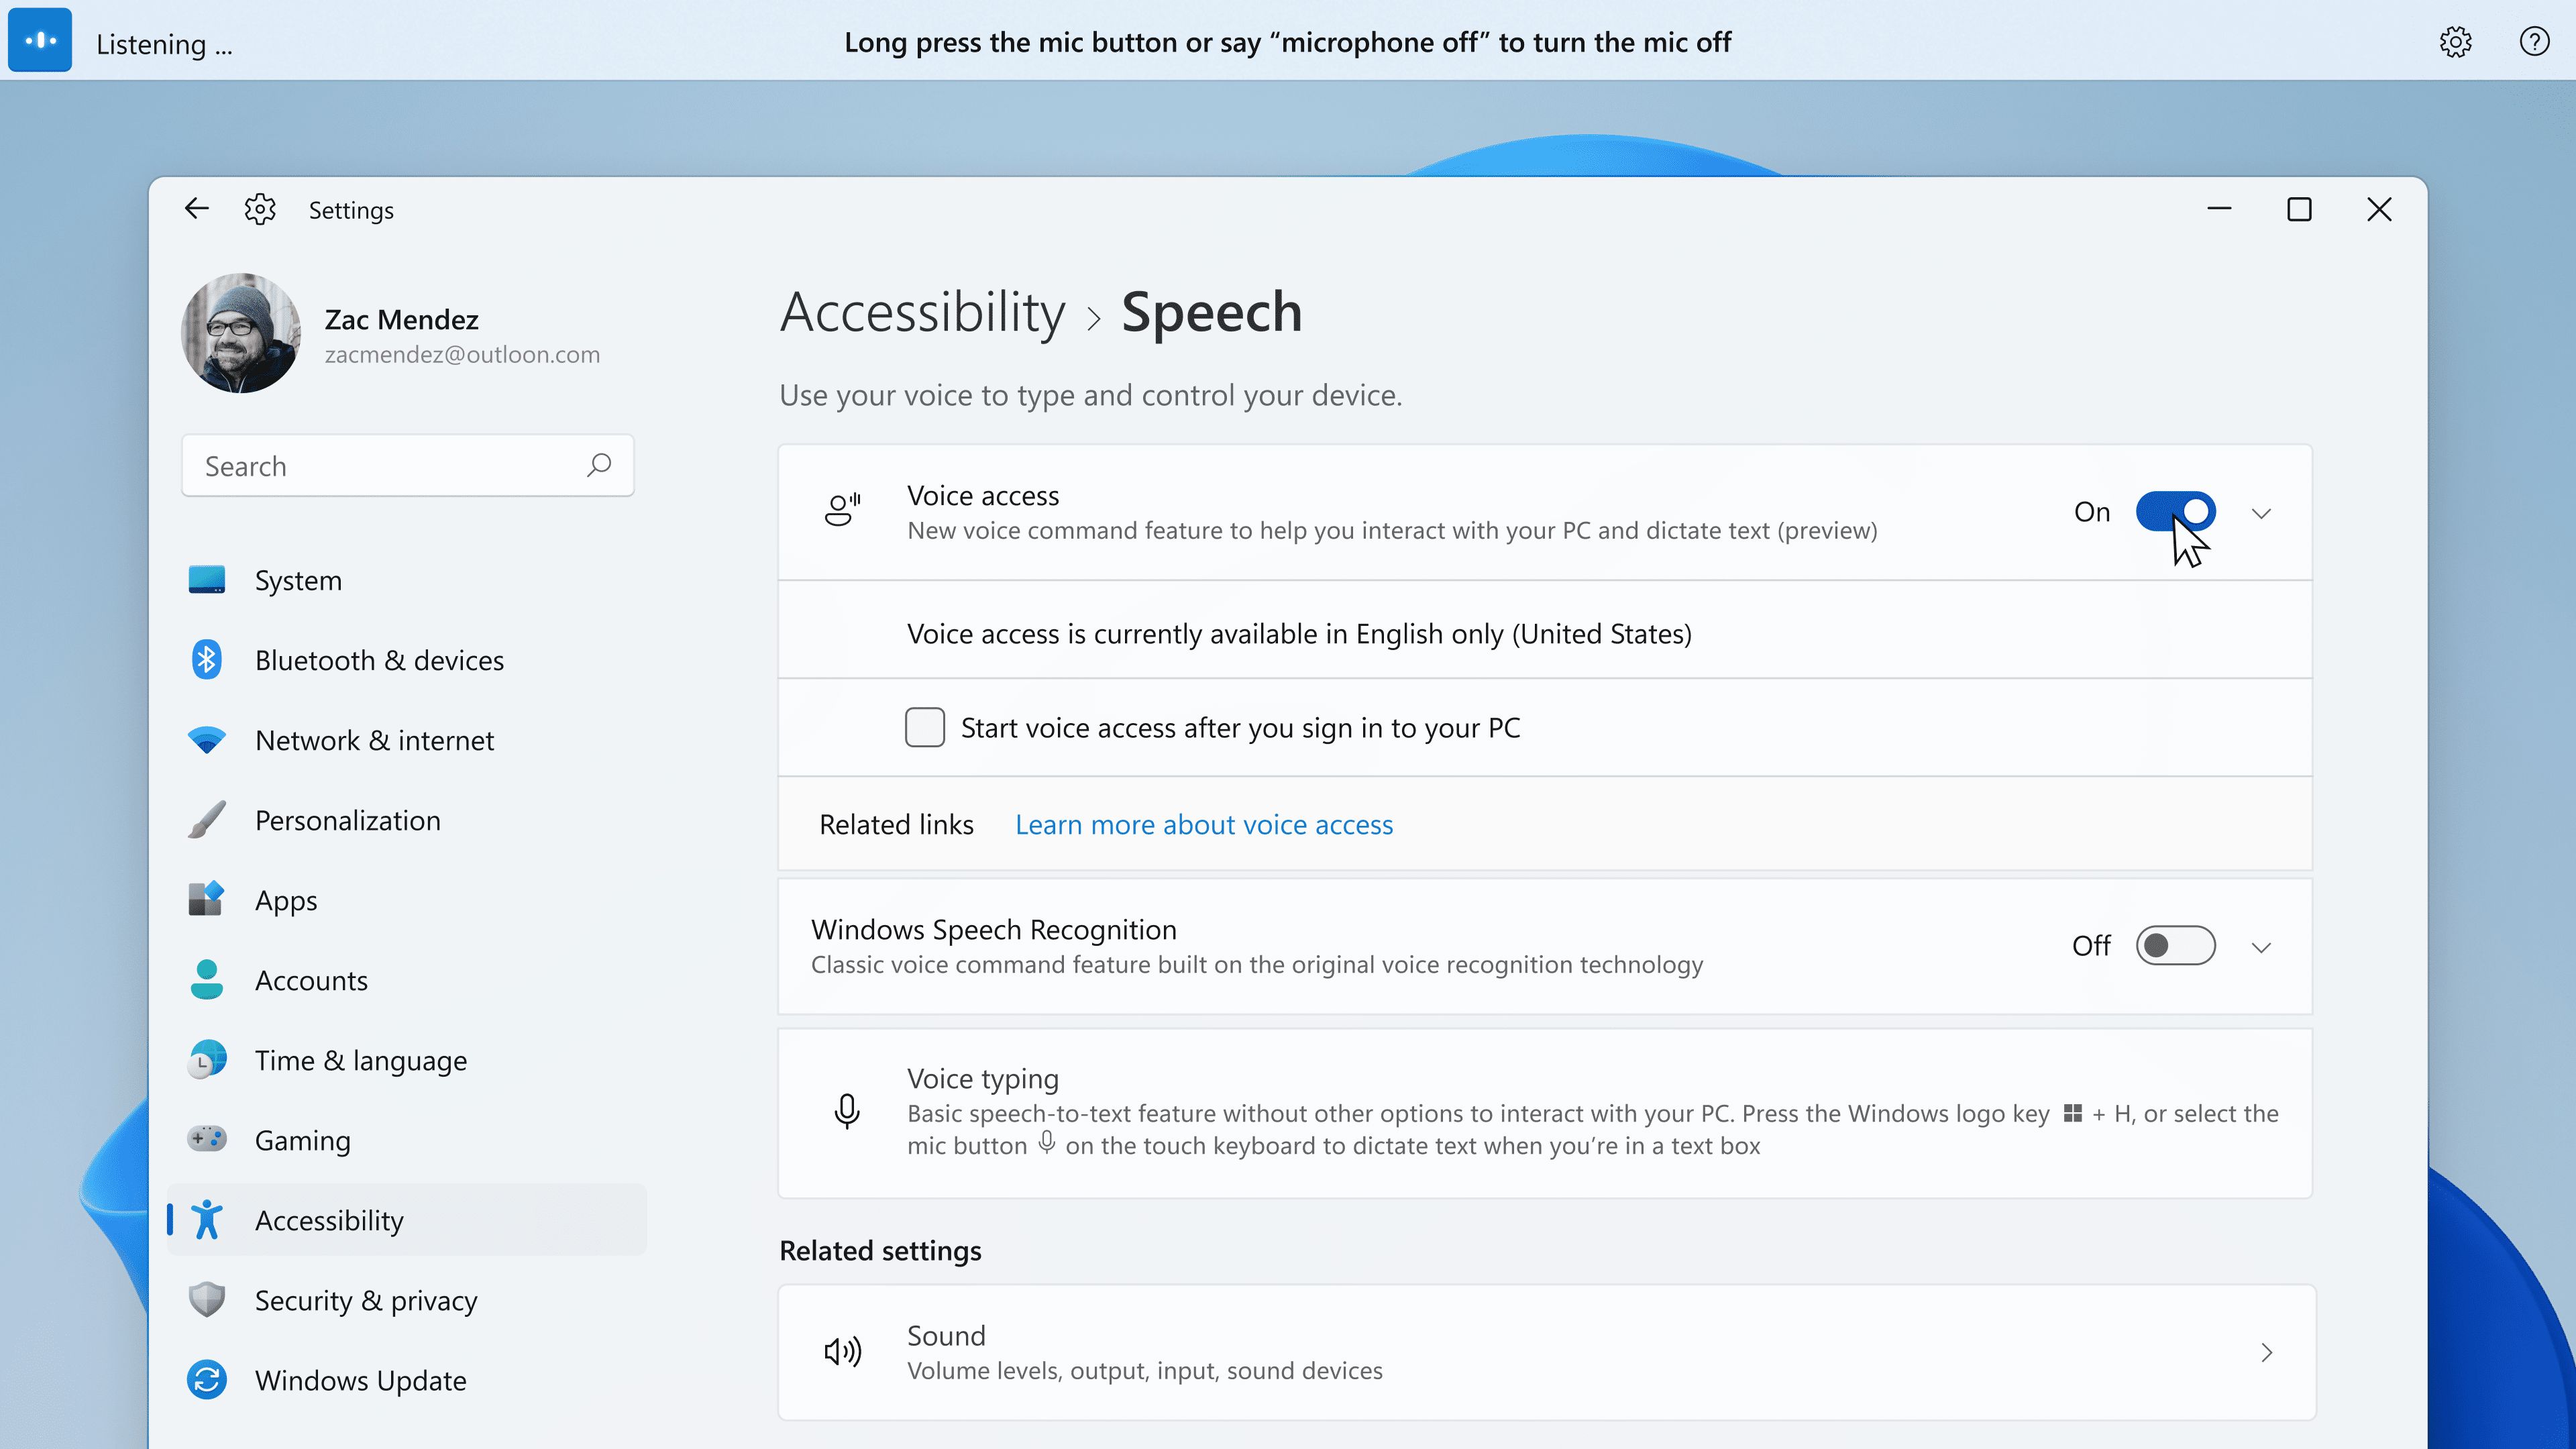 You can enable voice access under Settings ><figcaption id=